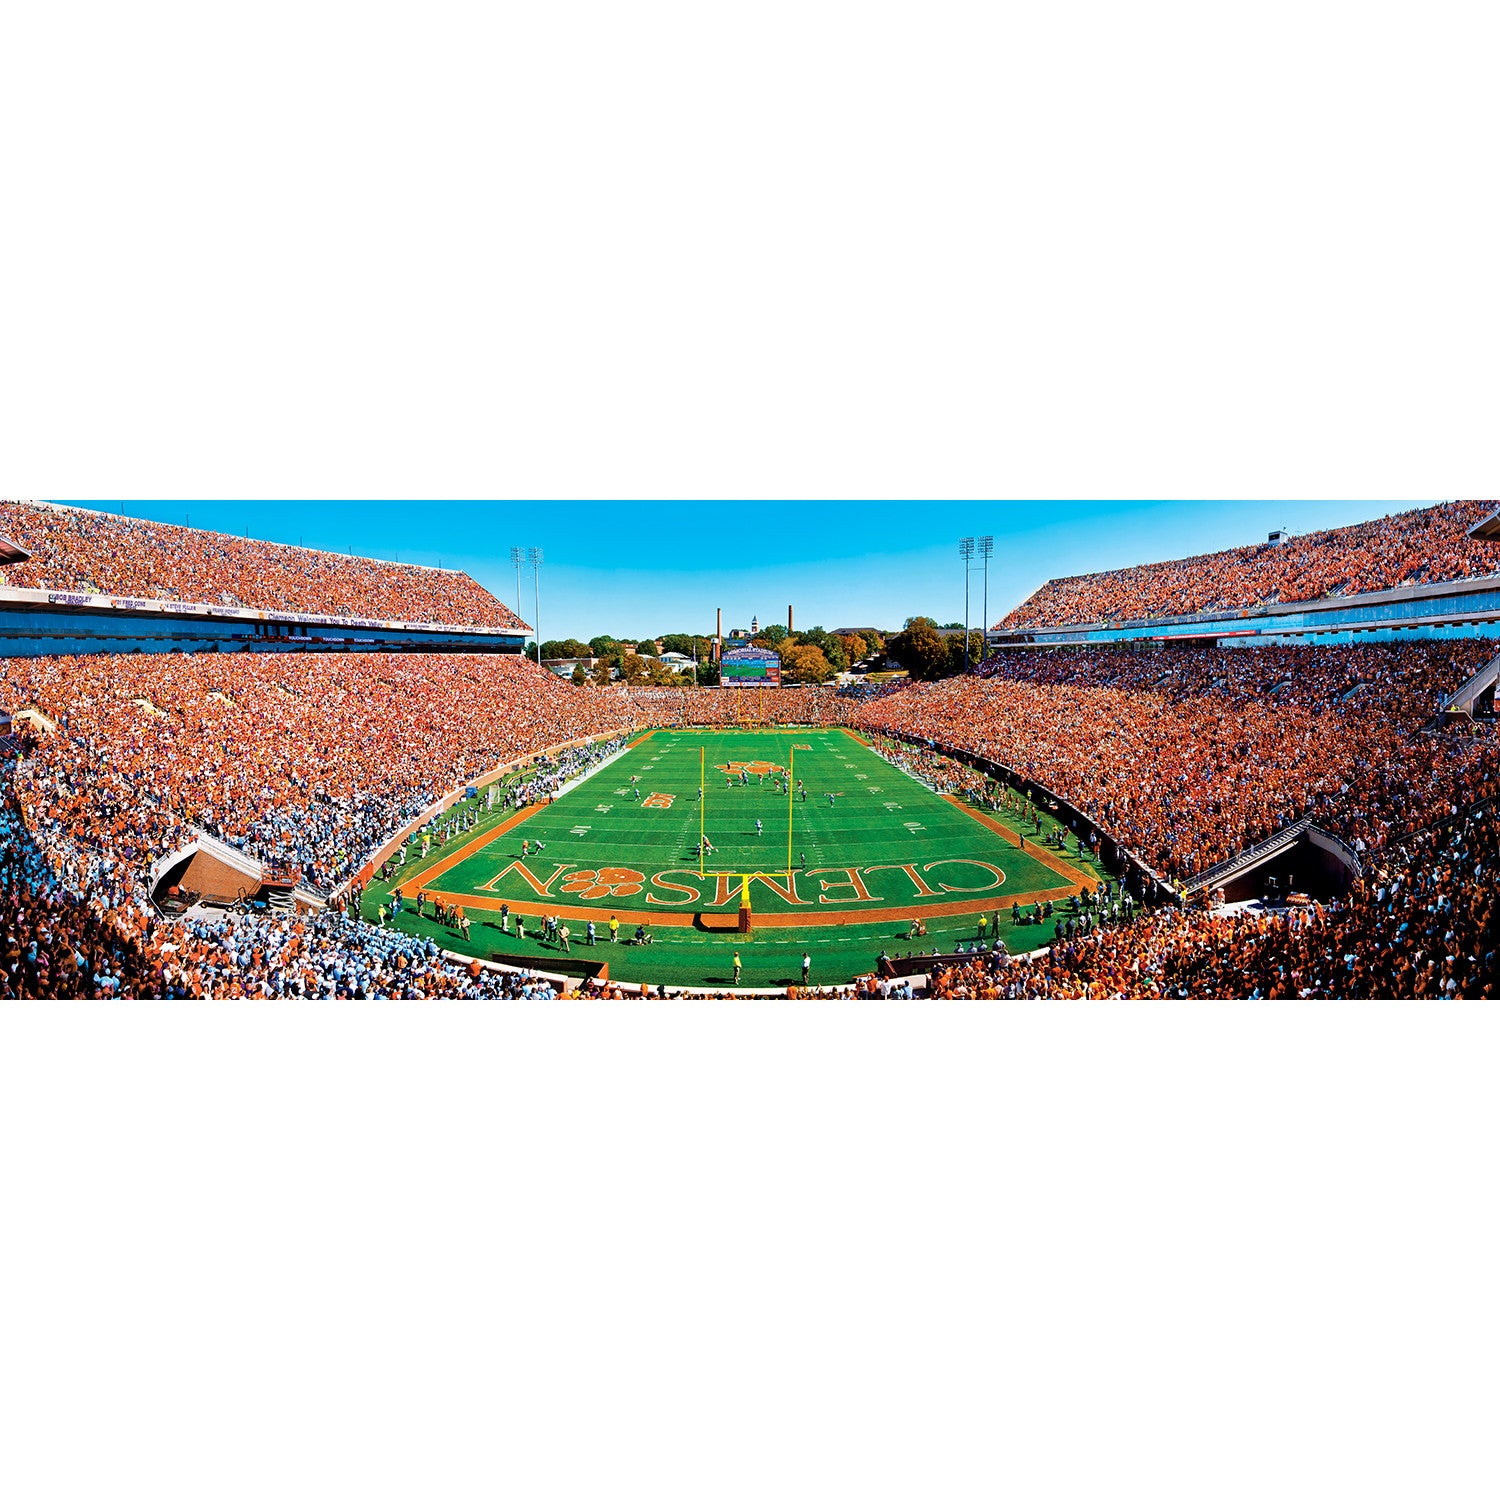 Clemson Tigers NCAA 1000pc Panoramic Puzzle - End Zone